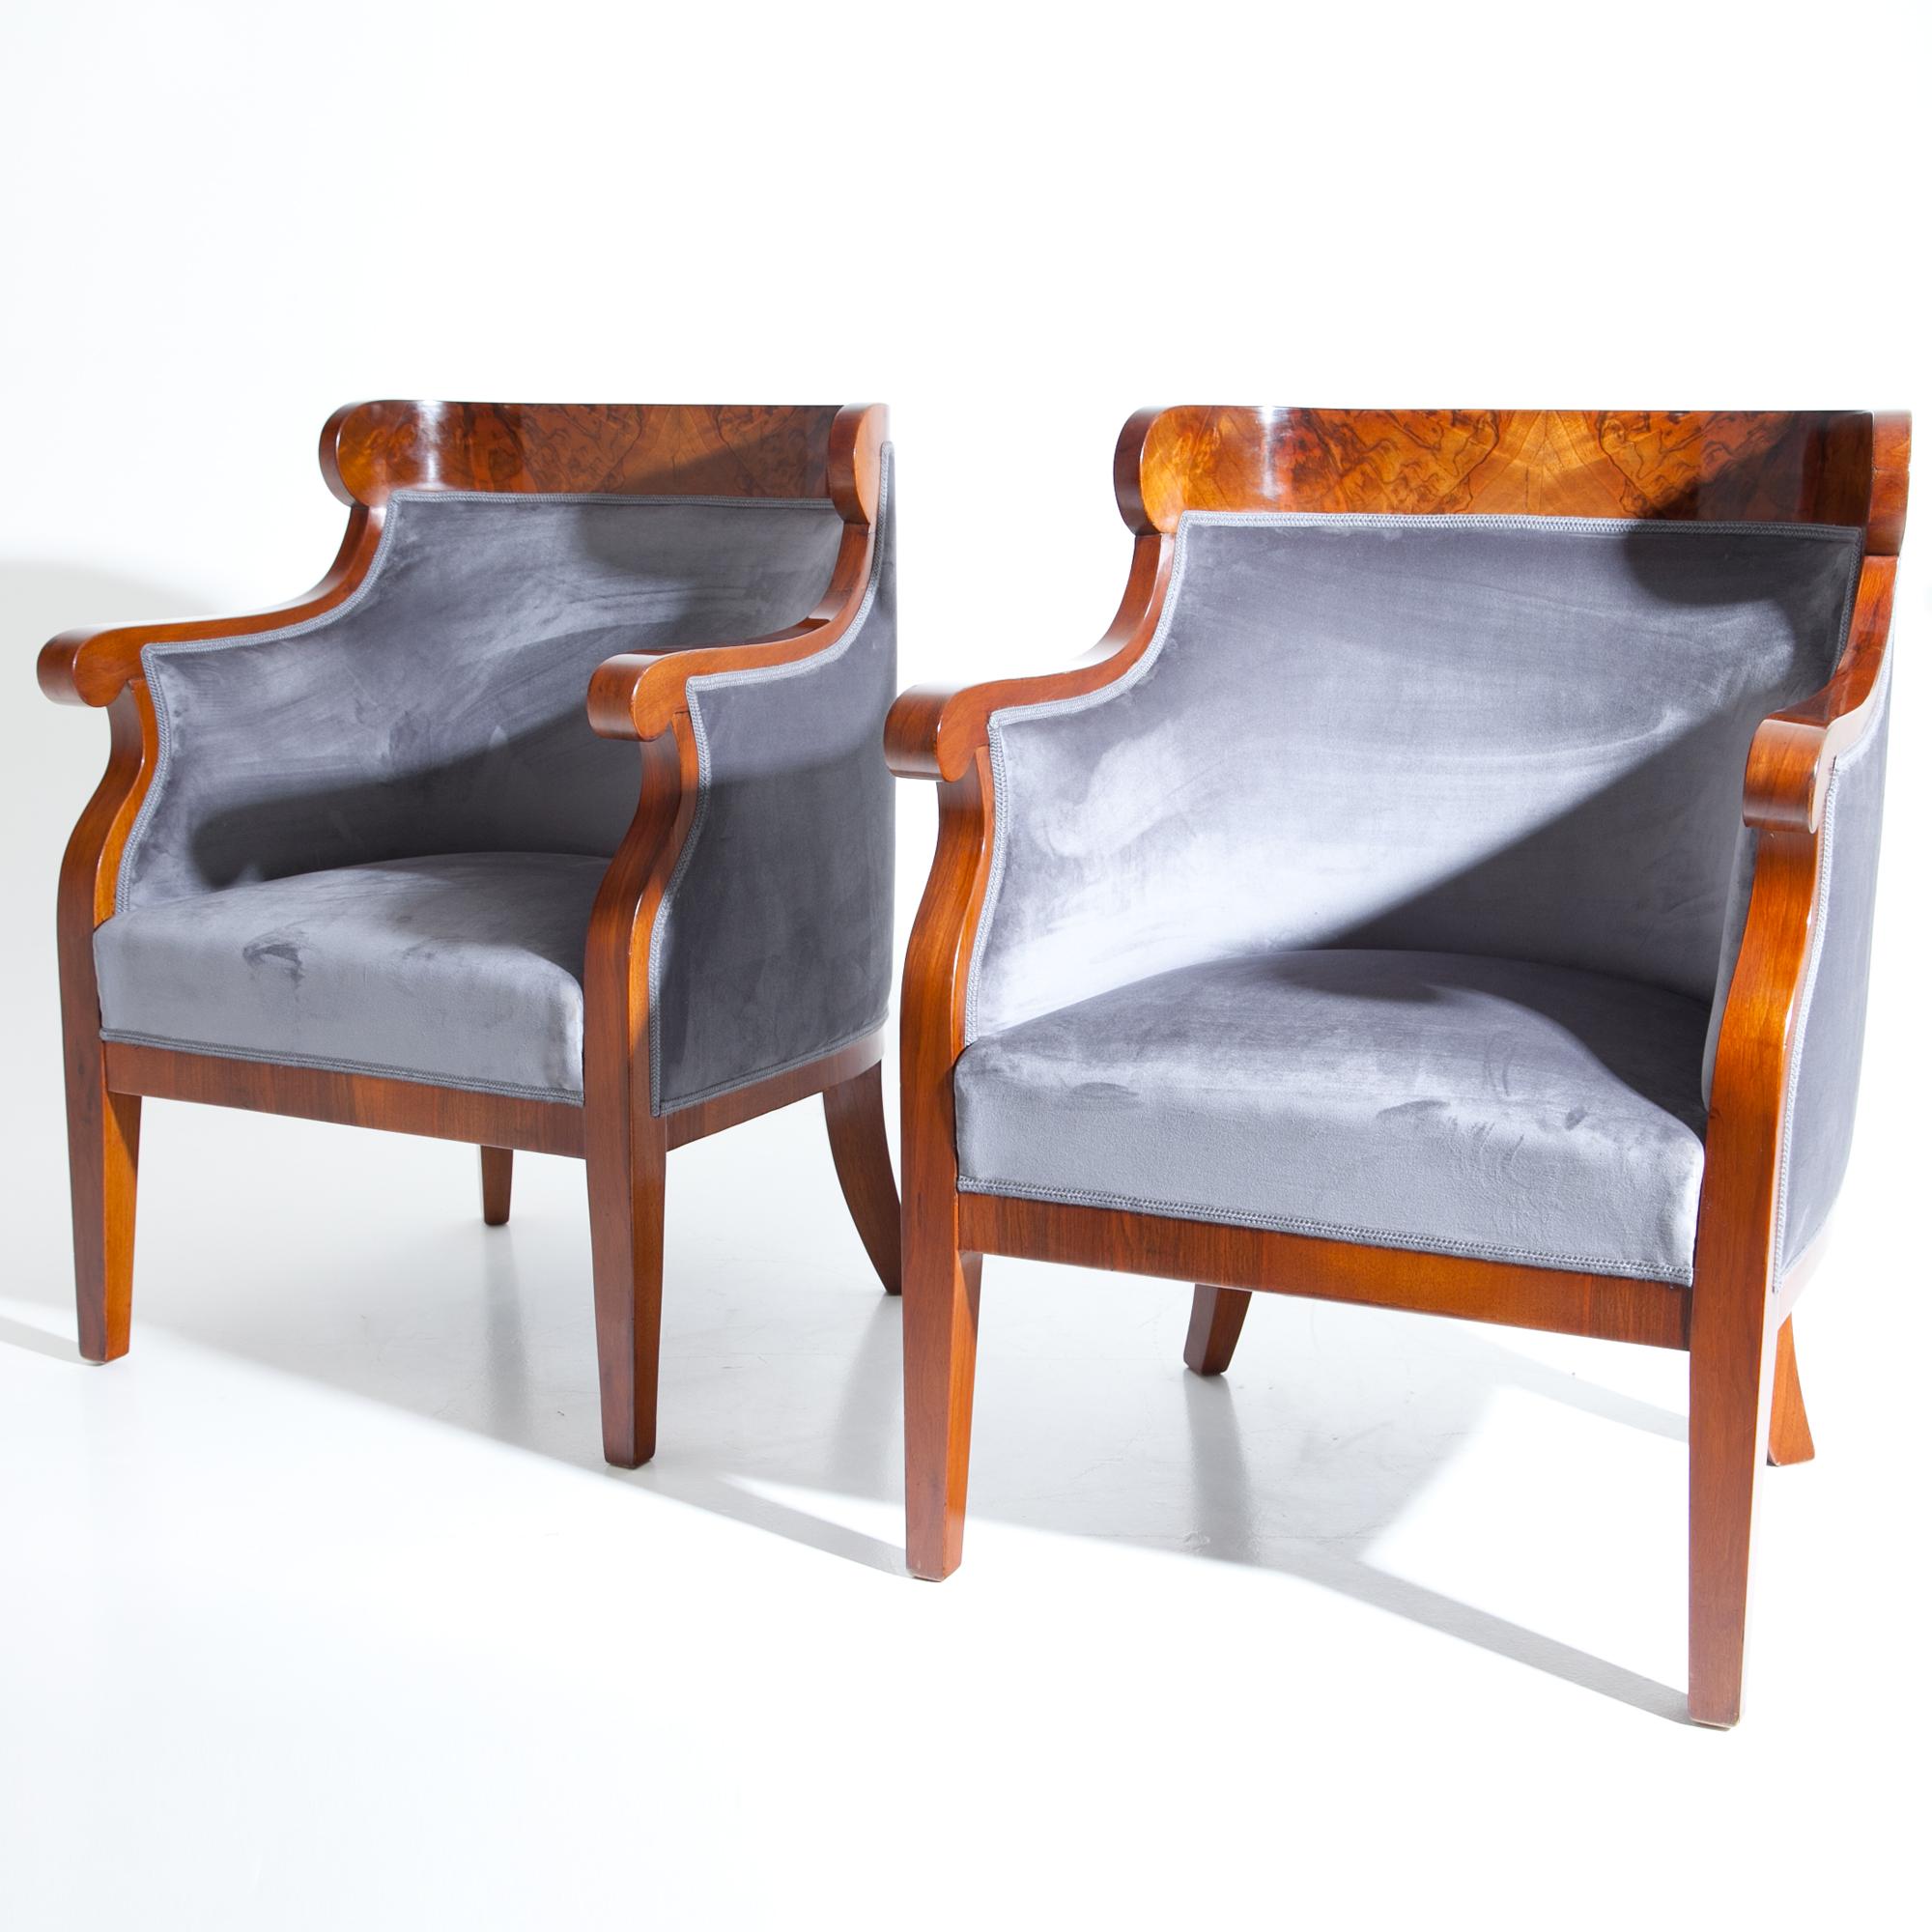 Pair of Late Biedermeier armchairs, veneered in walnut. The elegantly curved backrest turns into the armrests and is upholstered from both sides. These bergere chairs were refurbished and reupholstered with a high quality grey suede.